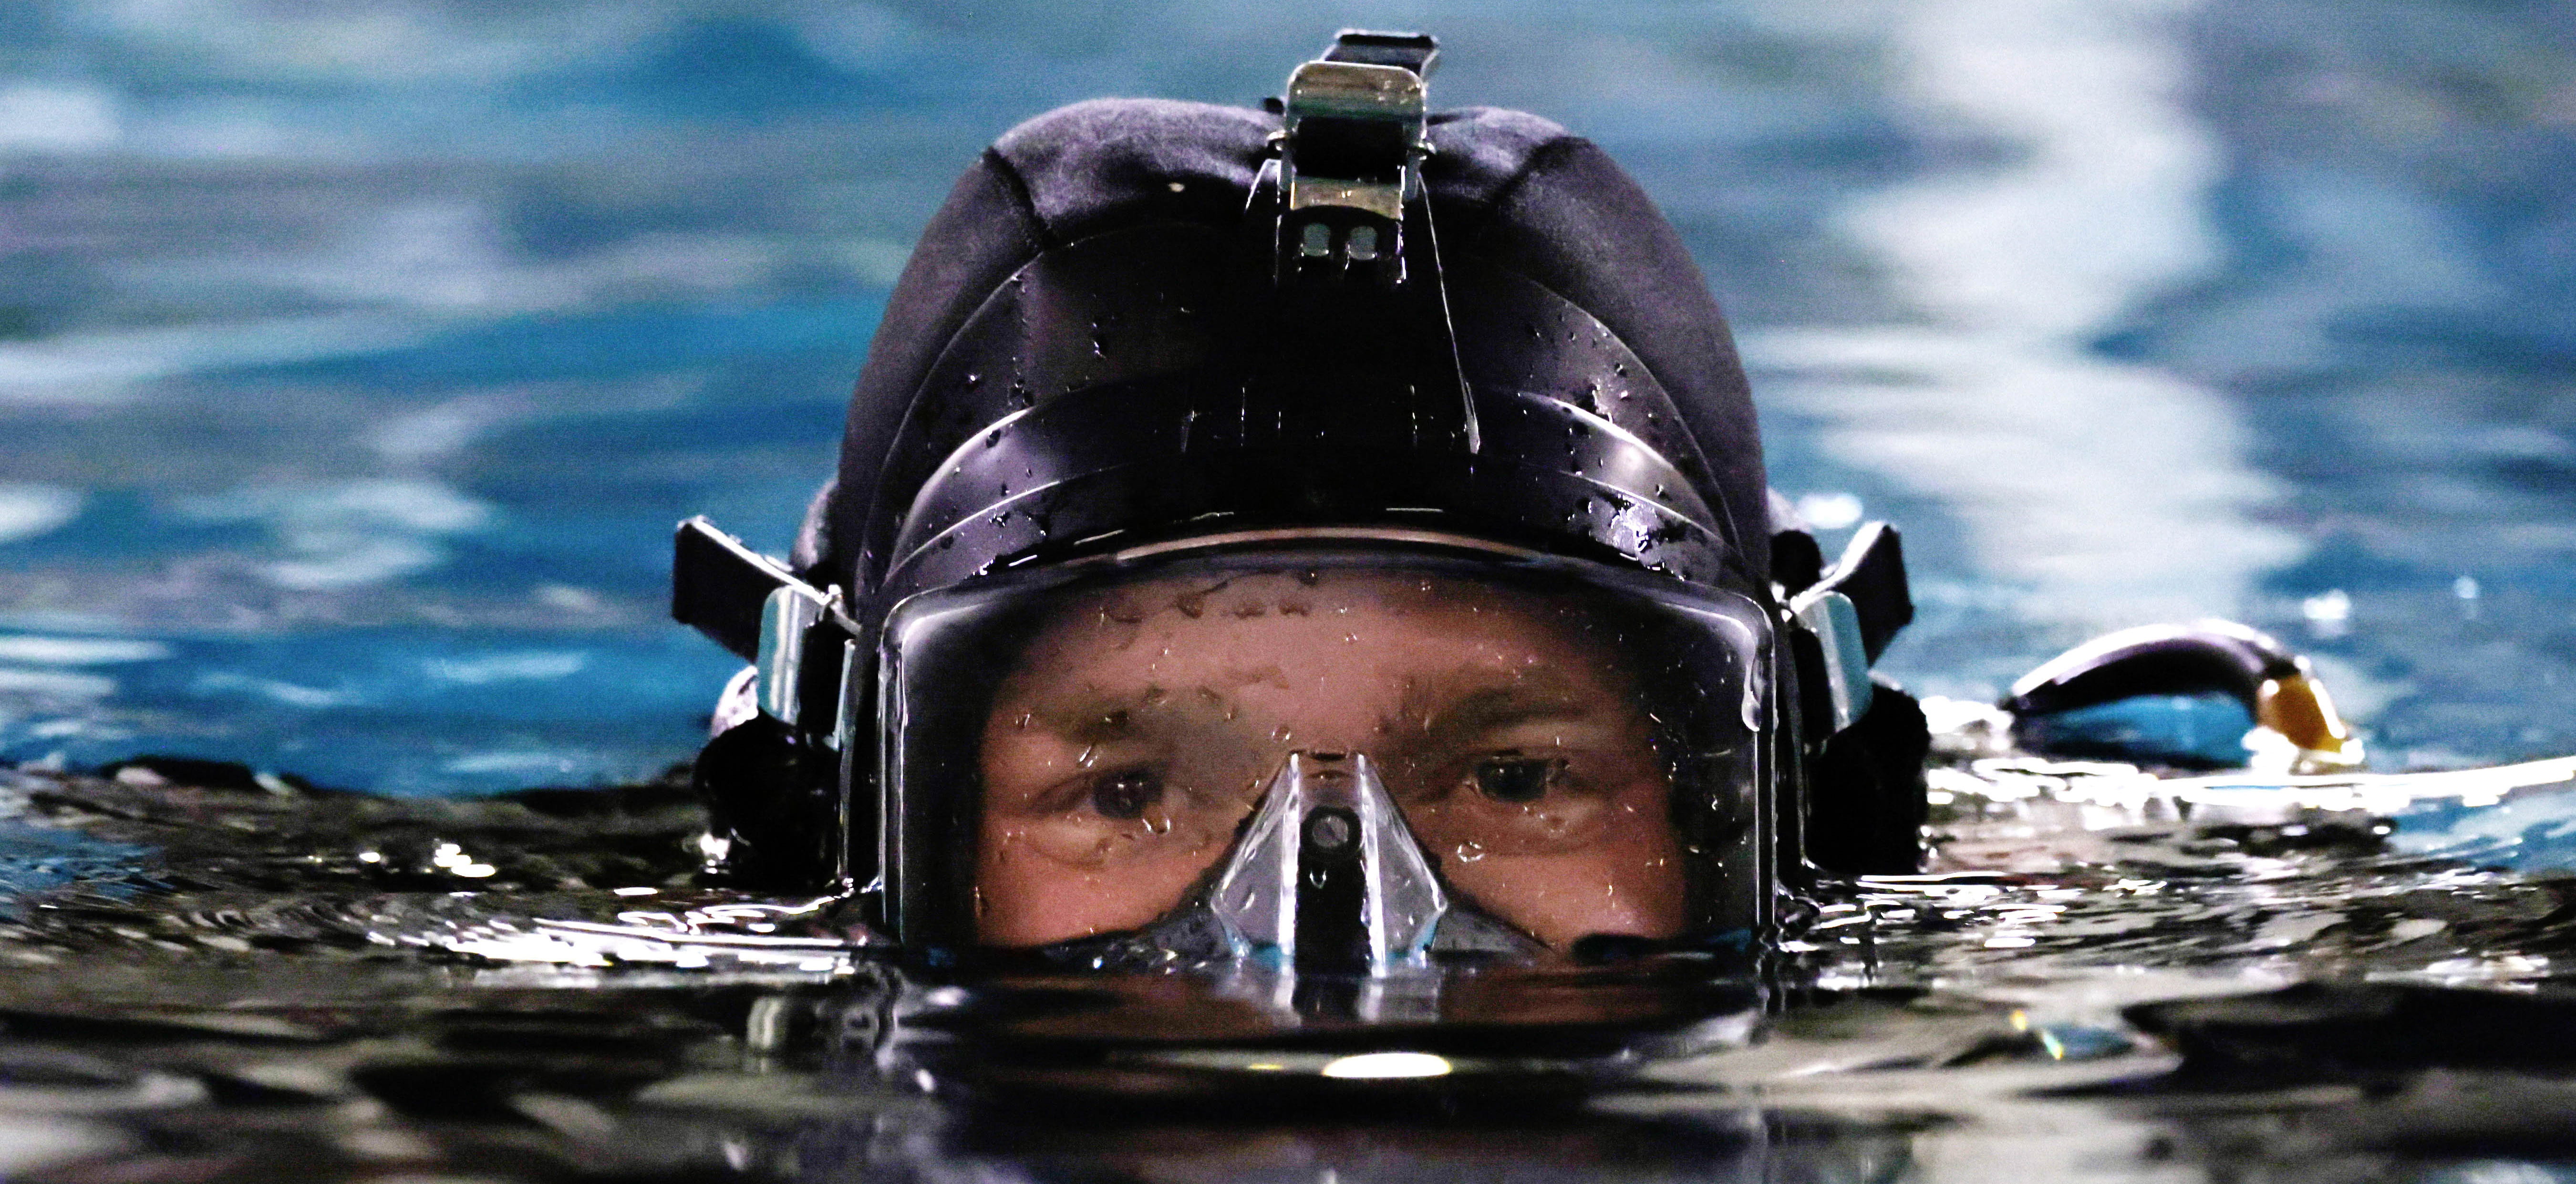 Royal Navy Diver emerges from water in diving equipment.